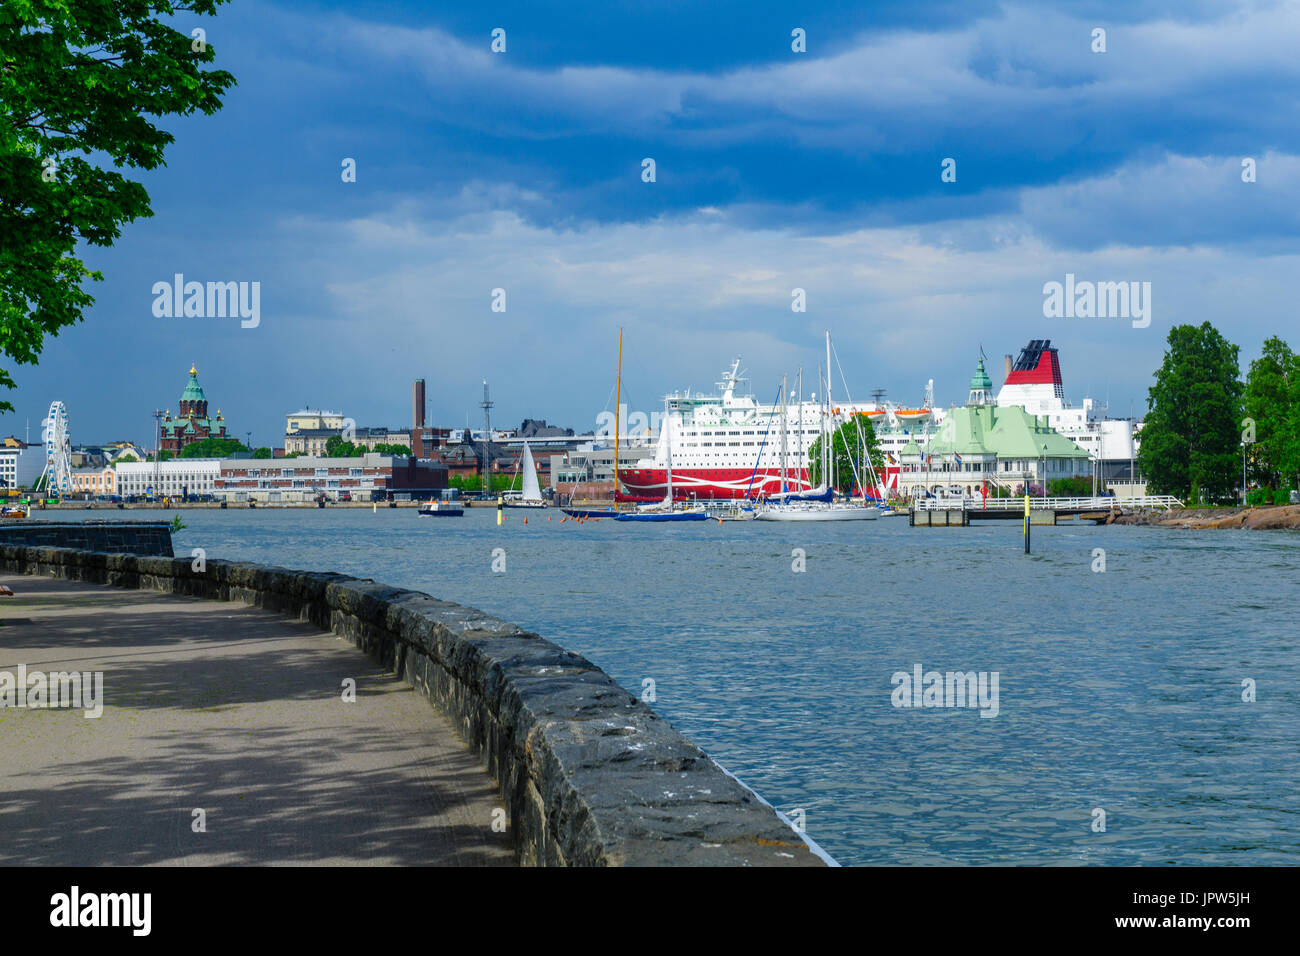 View of the Luoto island, with the promenade, ferry boats, the Russian Orthodox Uspenski Cathedral, and the SkyWheel in Helsinki, Finland Stock Photo